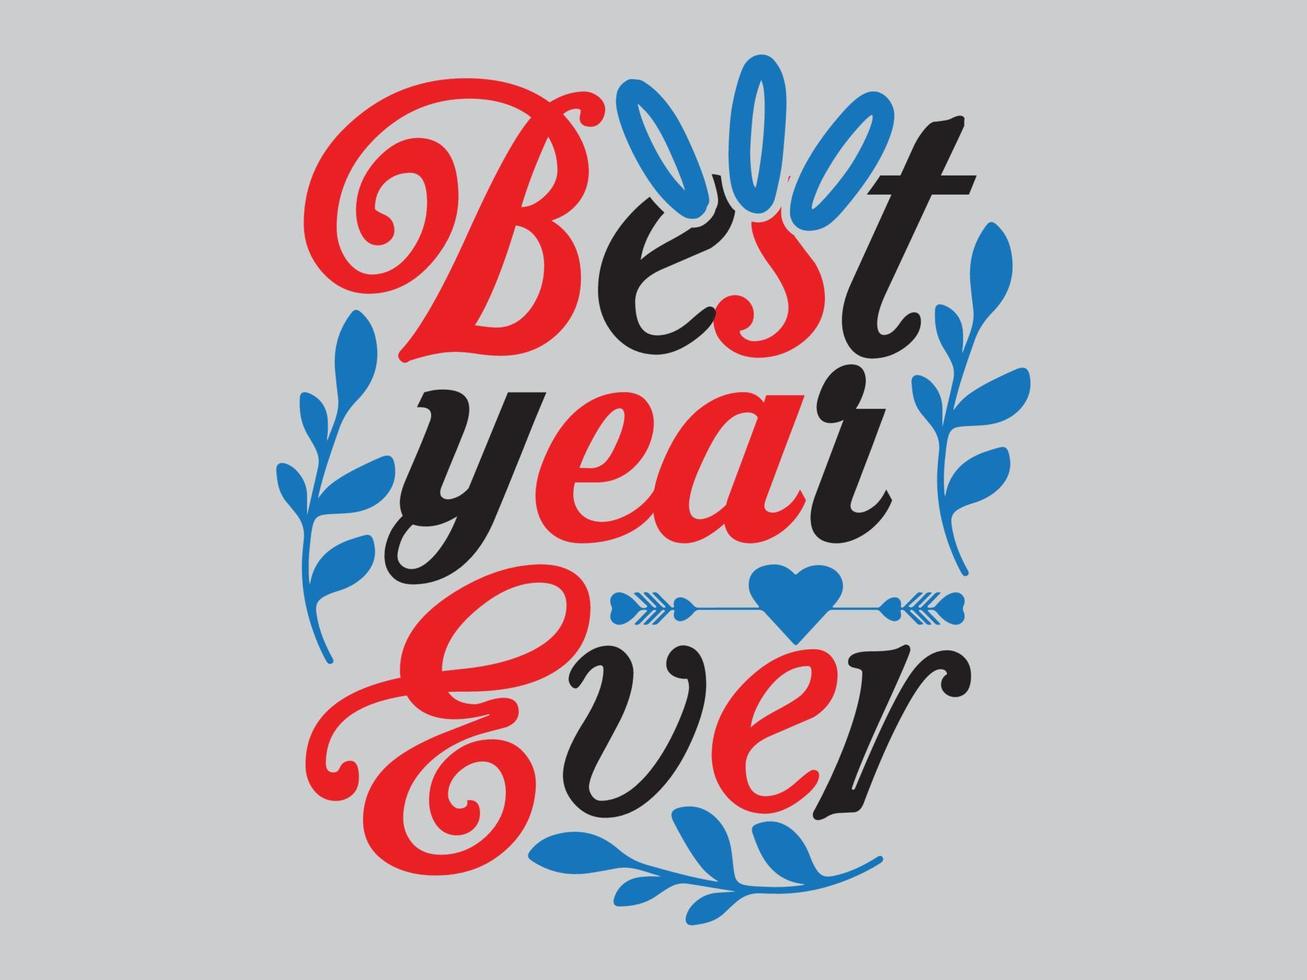 New Year T Shirt Design File vector